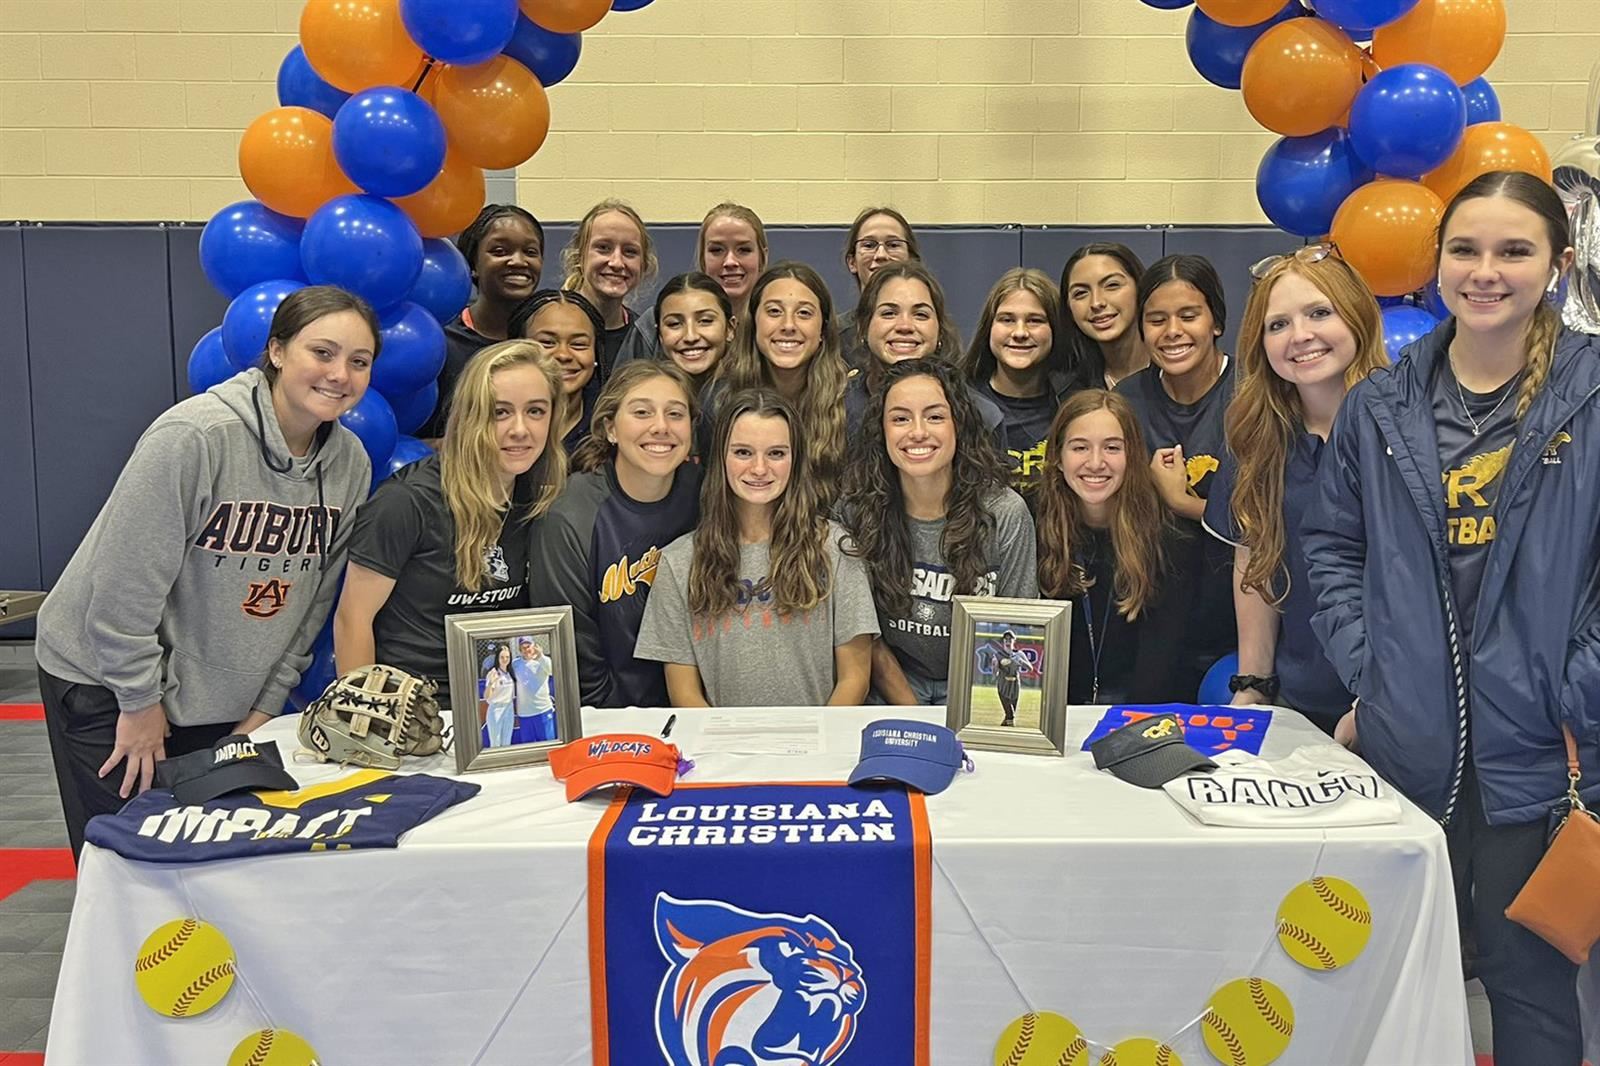 Cy Ranch senior Emily Landry, seated center, smiles after signing a letter of intent to Louisiana Christian University.